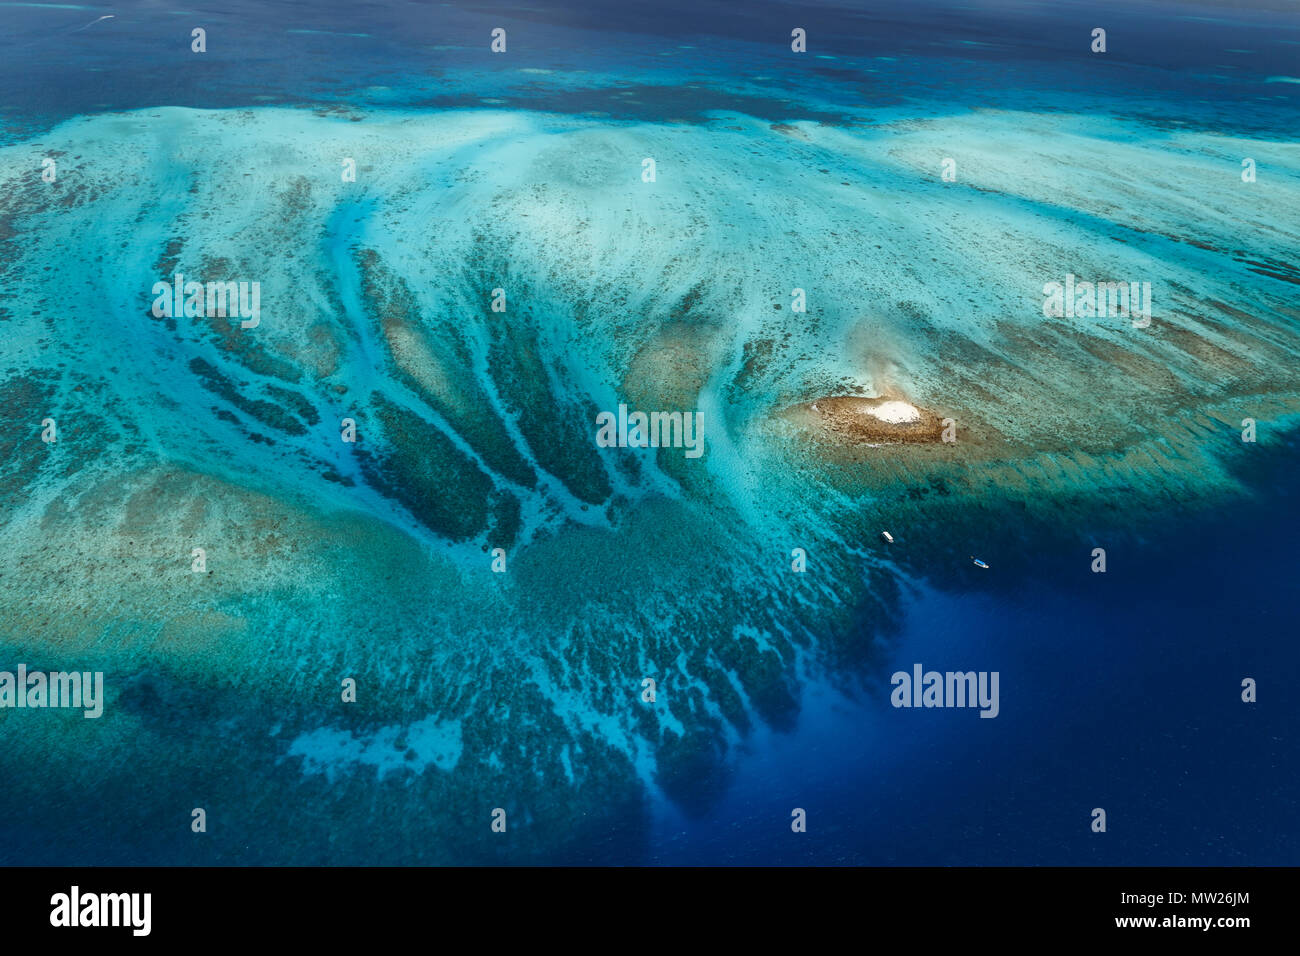 Arial view of a section of  barrier reef and the system of channels protecting a coral atoll Stock Photo